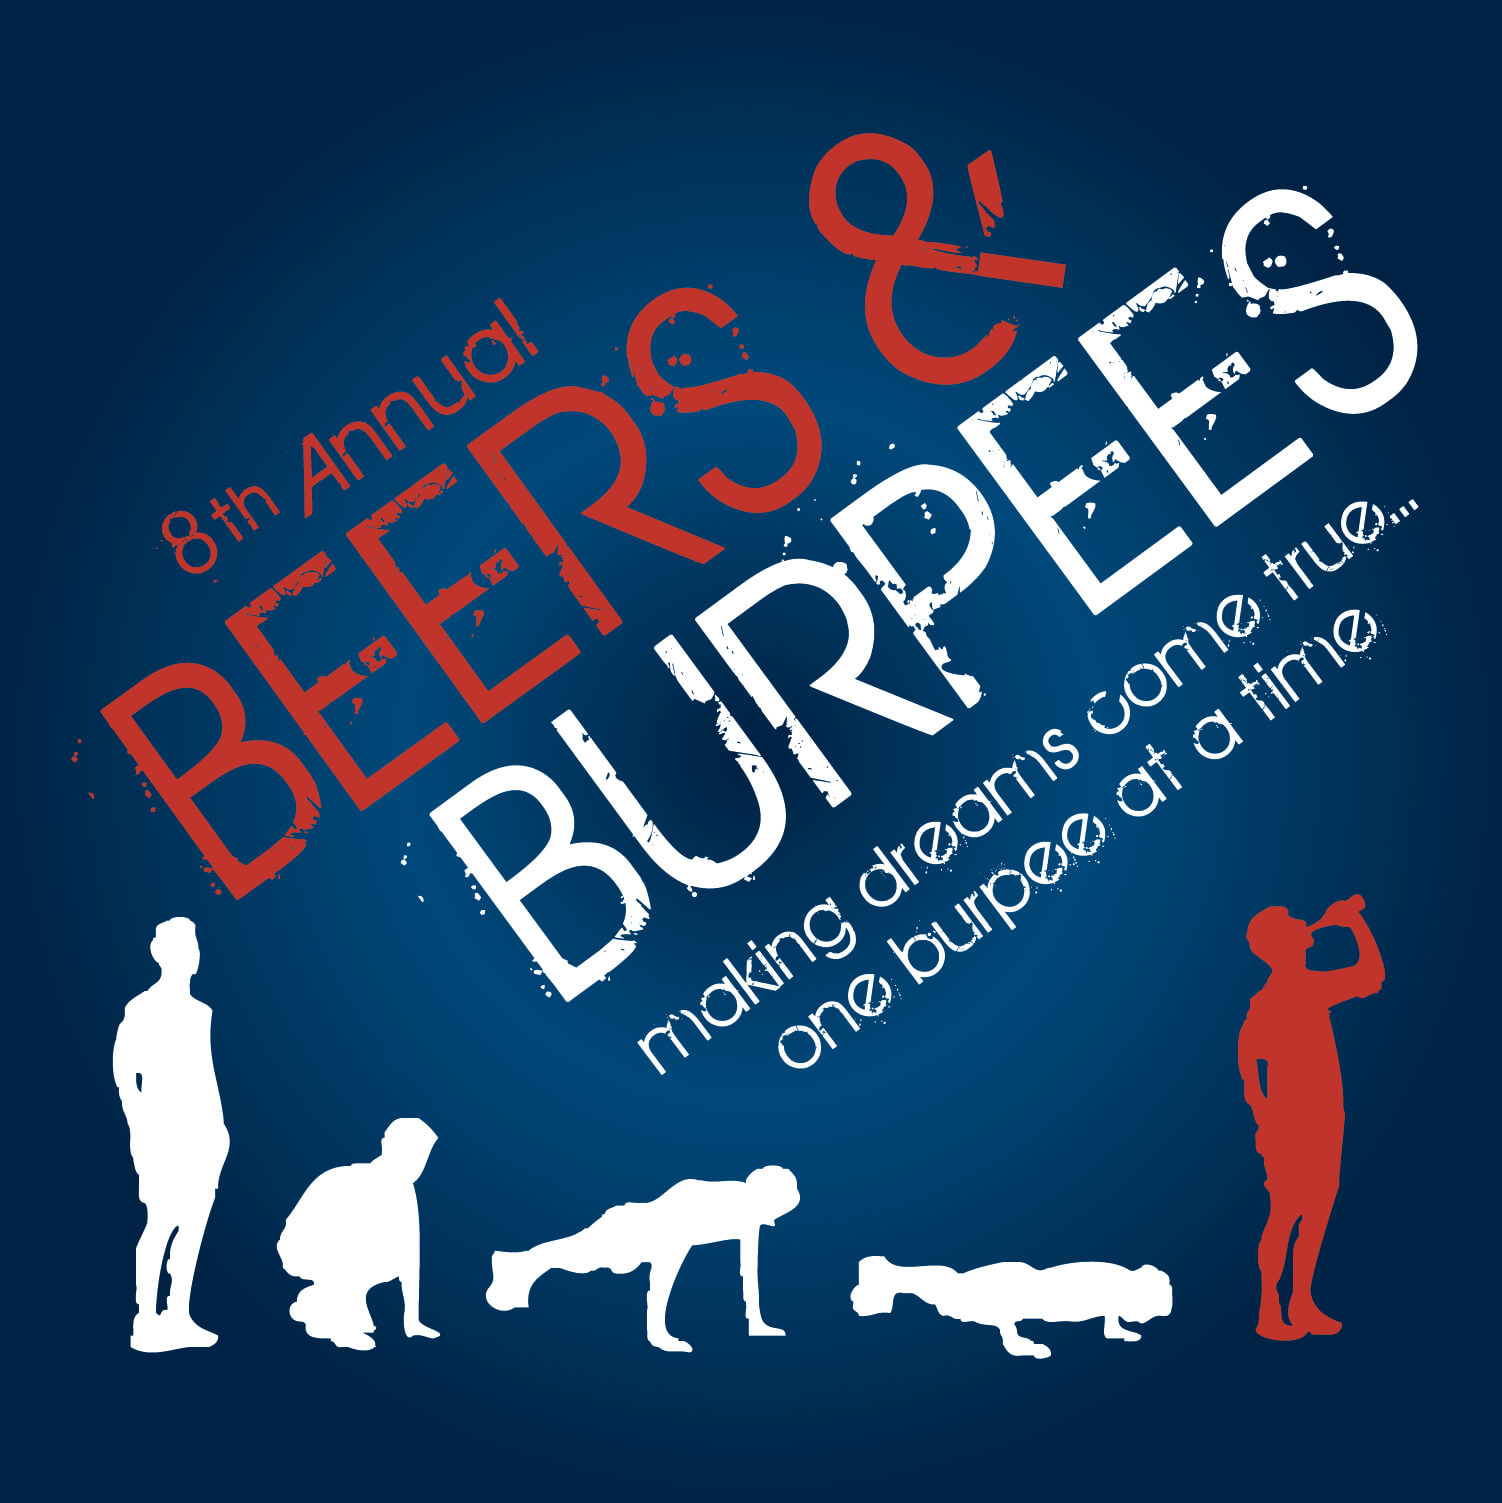 Beers and Burpees charity event